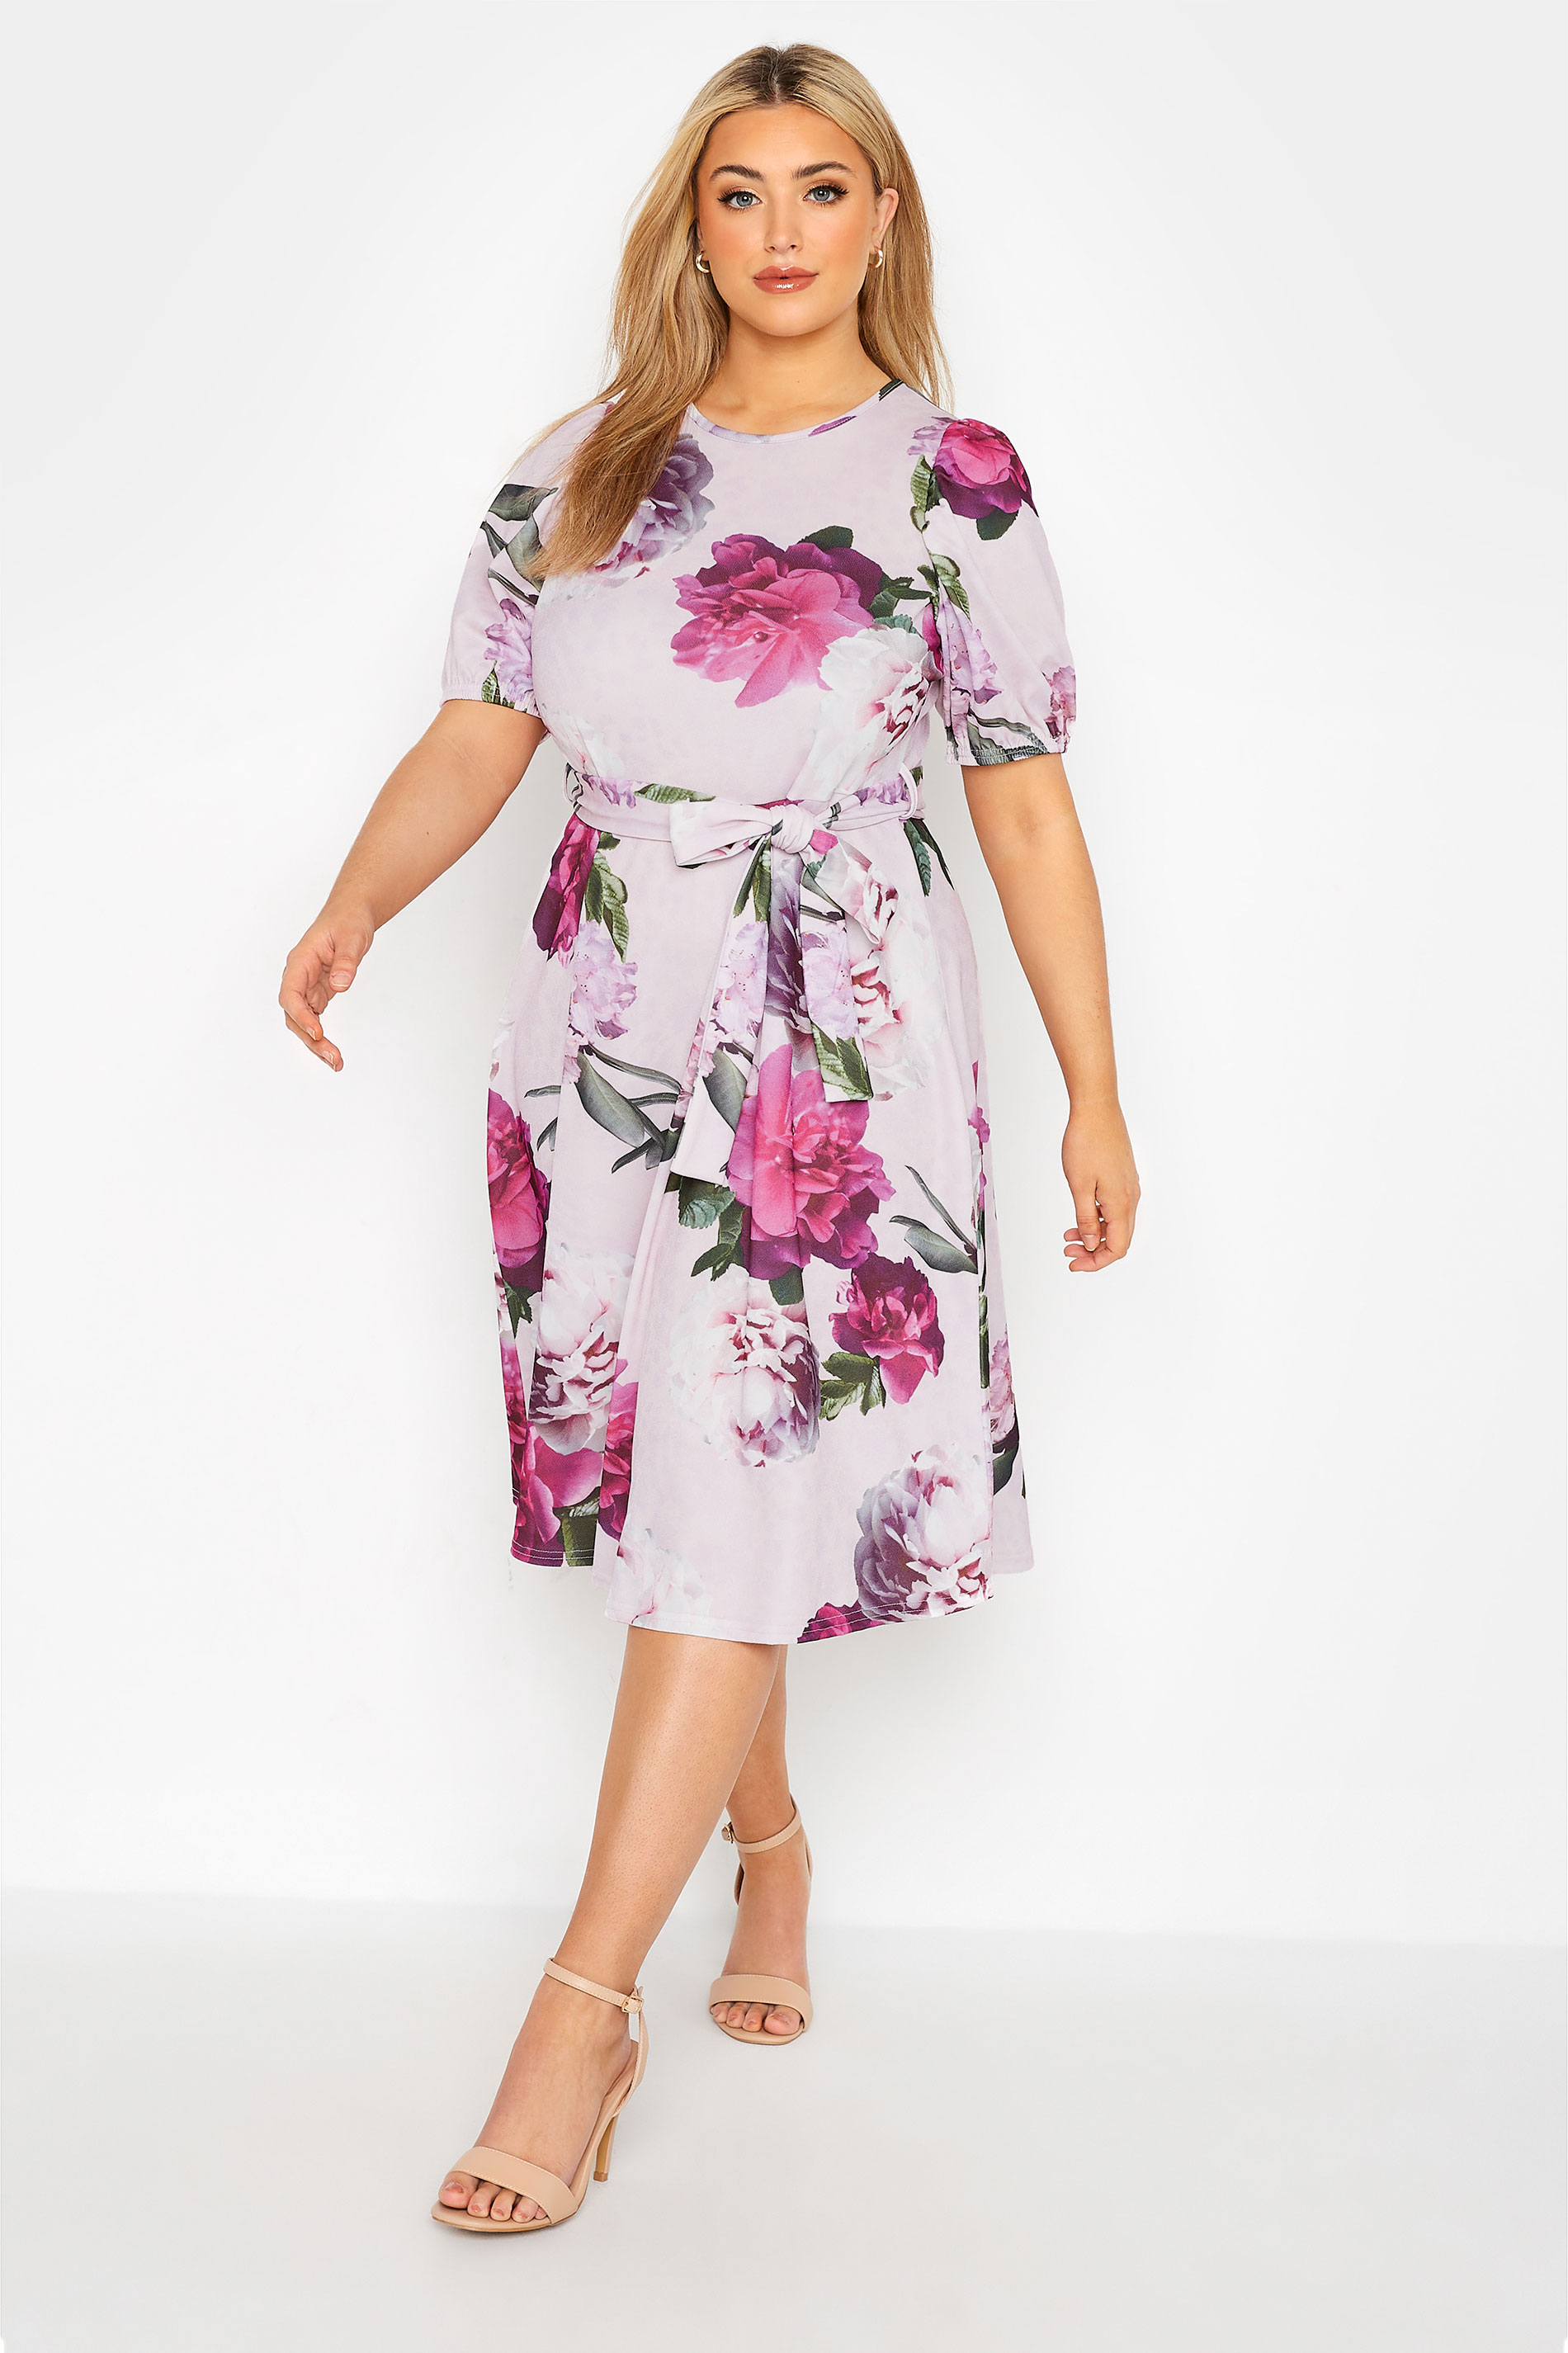 Robes Grande Taille Grande taille  Robes Imprimé Floral | YOURS LONDON - Robe Rose Floral Ceinture Manches Bouffantes - HG91354